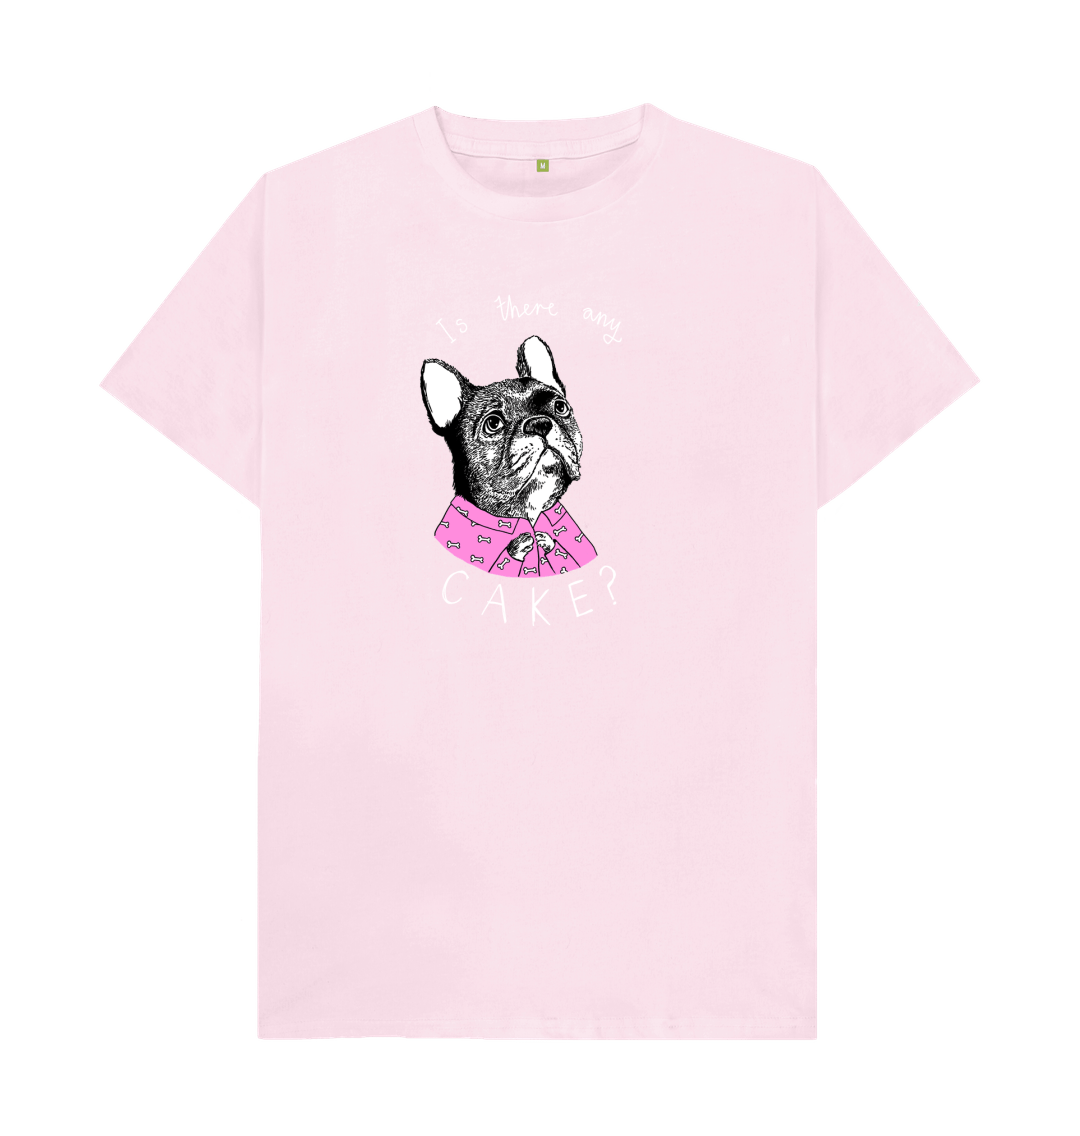 Pink 'Is There Any Cake?' Men's T-shirt